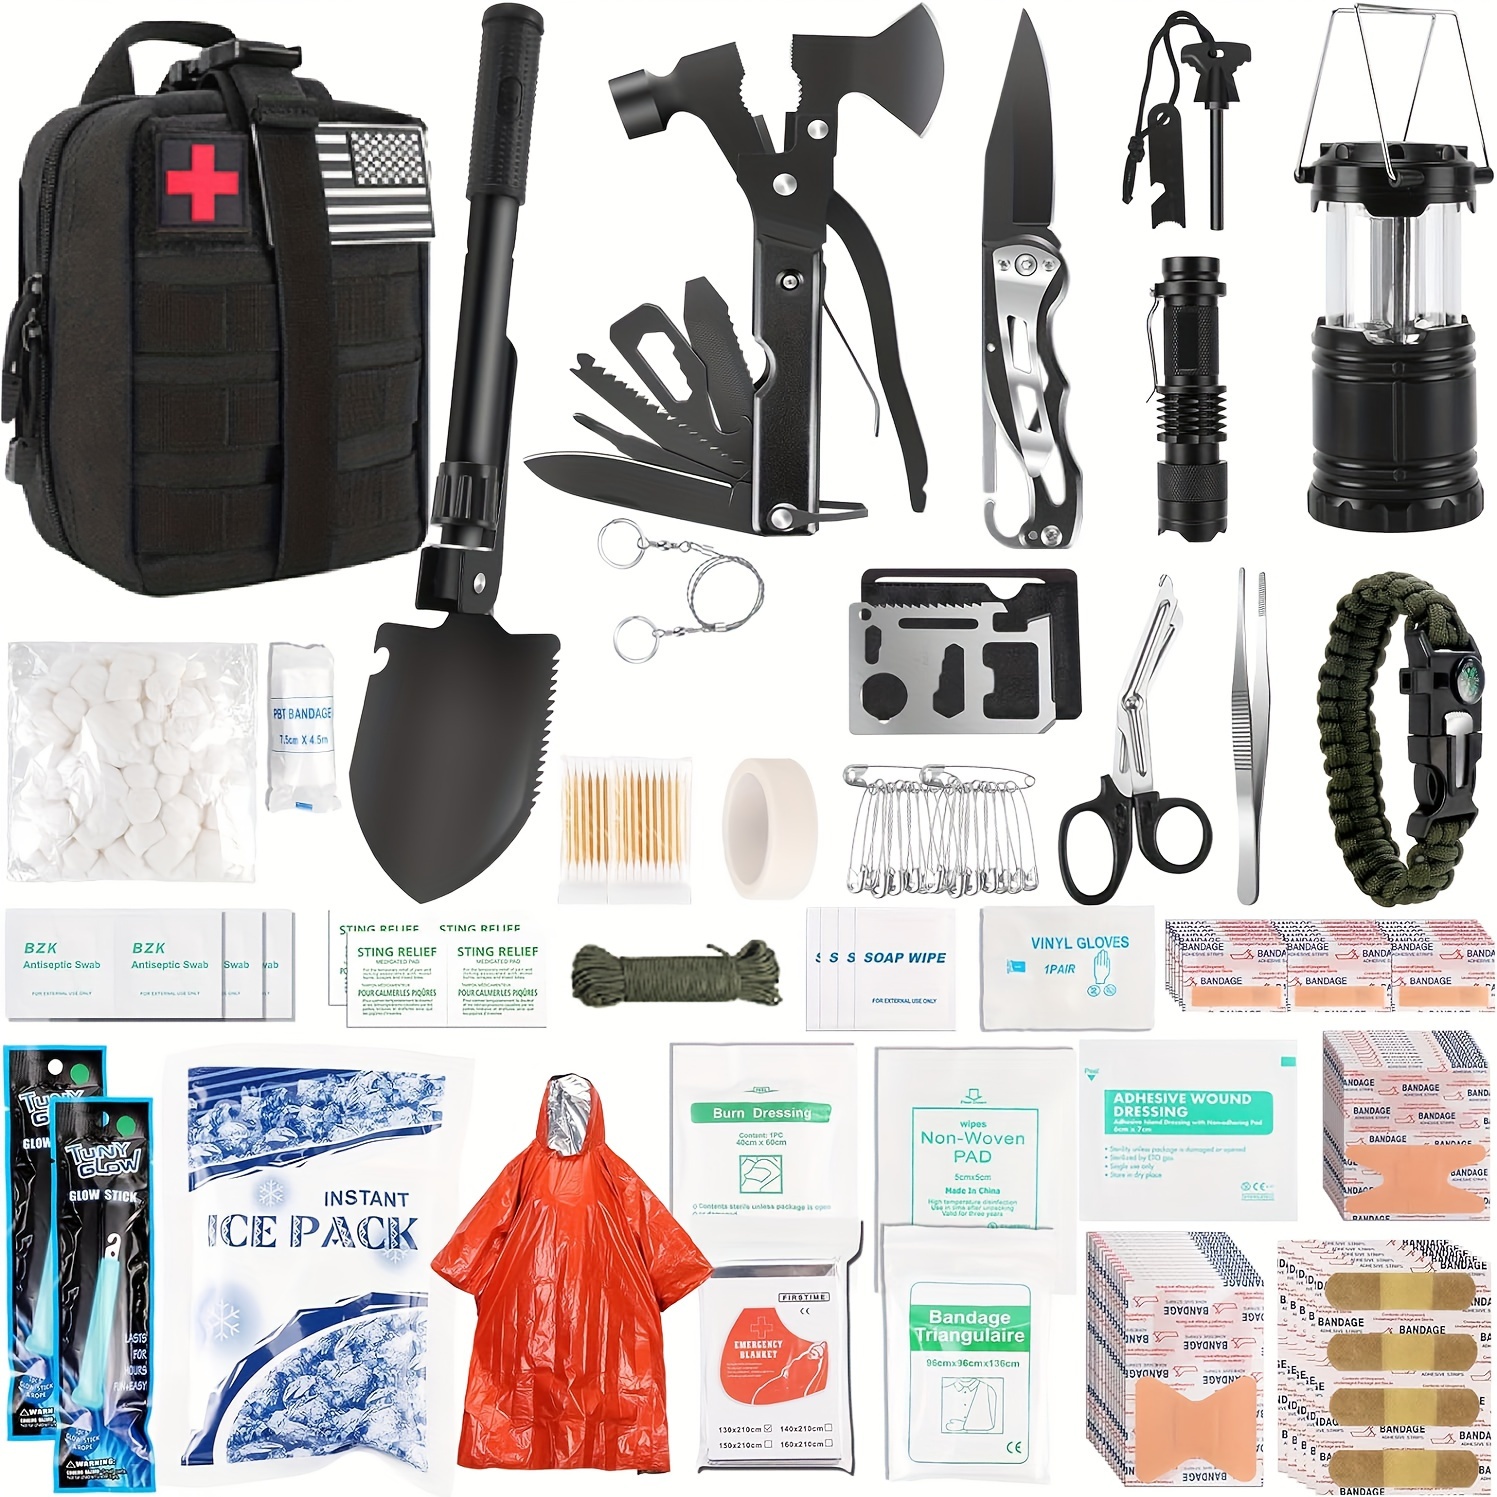 Survival Kit Tactical Outdoor Survival Kits - 12PC Essential Gear for  Camping, Hiking, Hunting, Fishing, Men, Military EDC Emergency Tool Kit -  China Emergency Survival Kit and Survival Gear Kit price